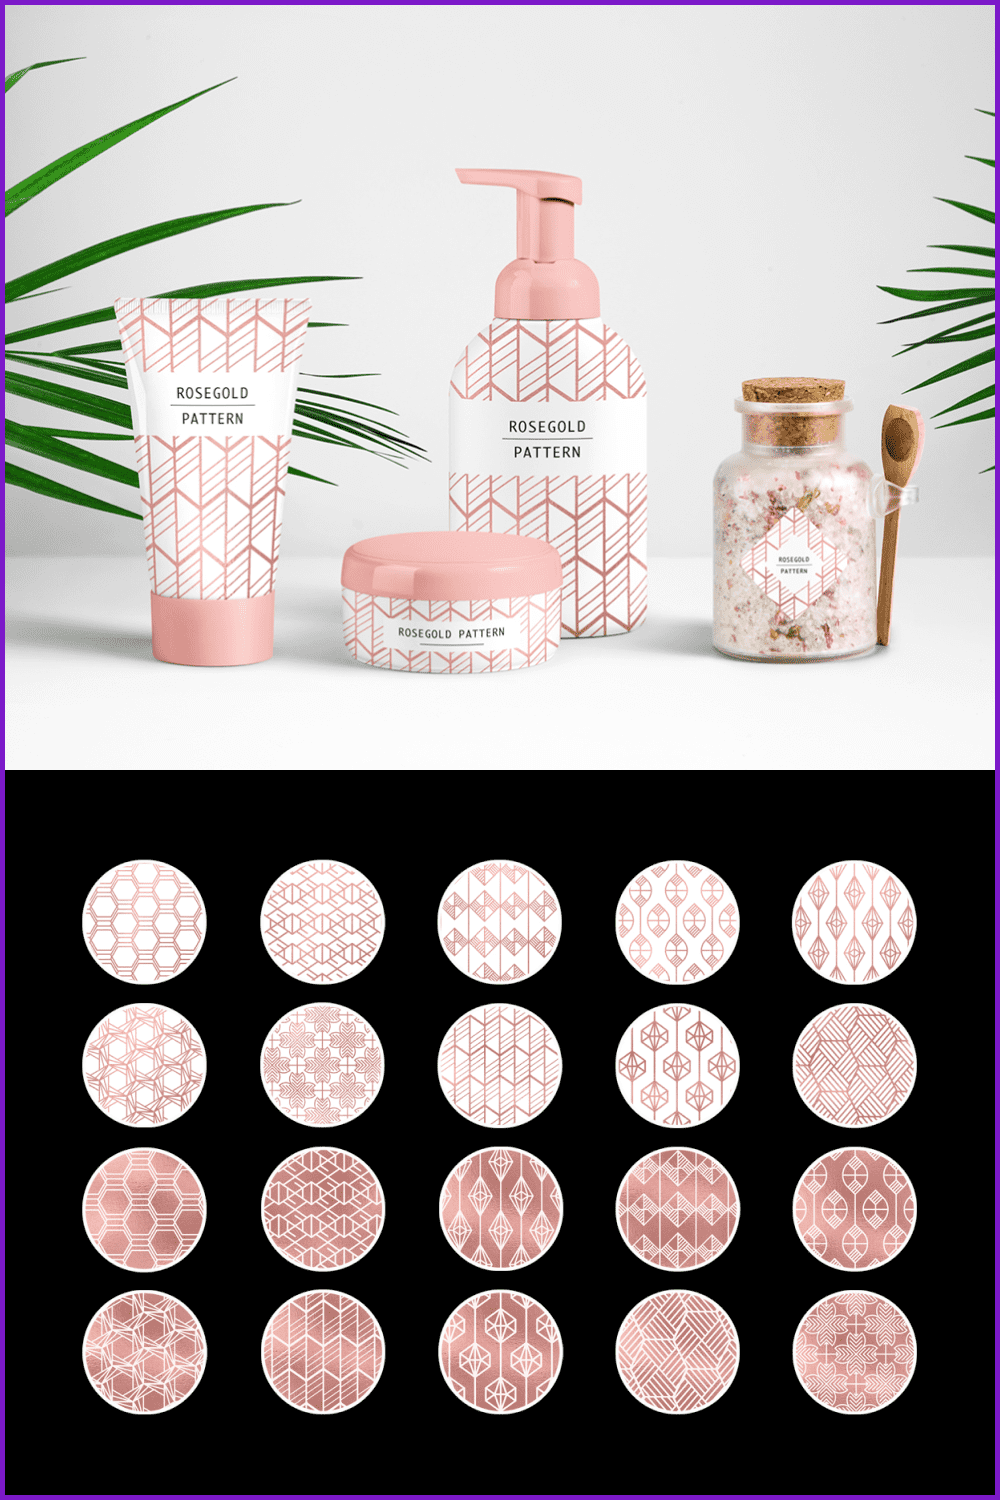 Examples of geometric pink patterns in circles and cosmetic products.